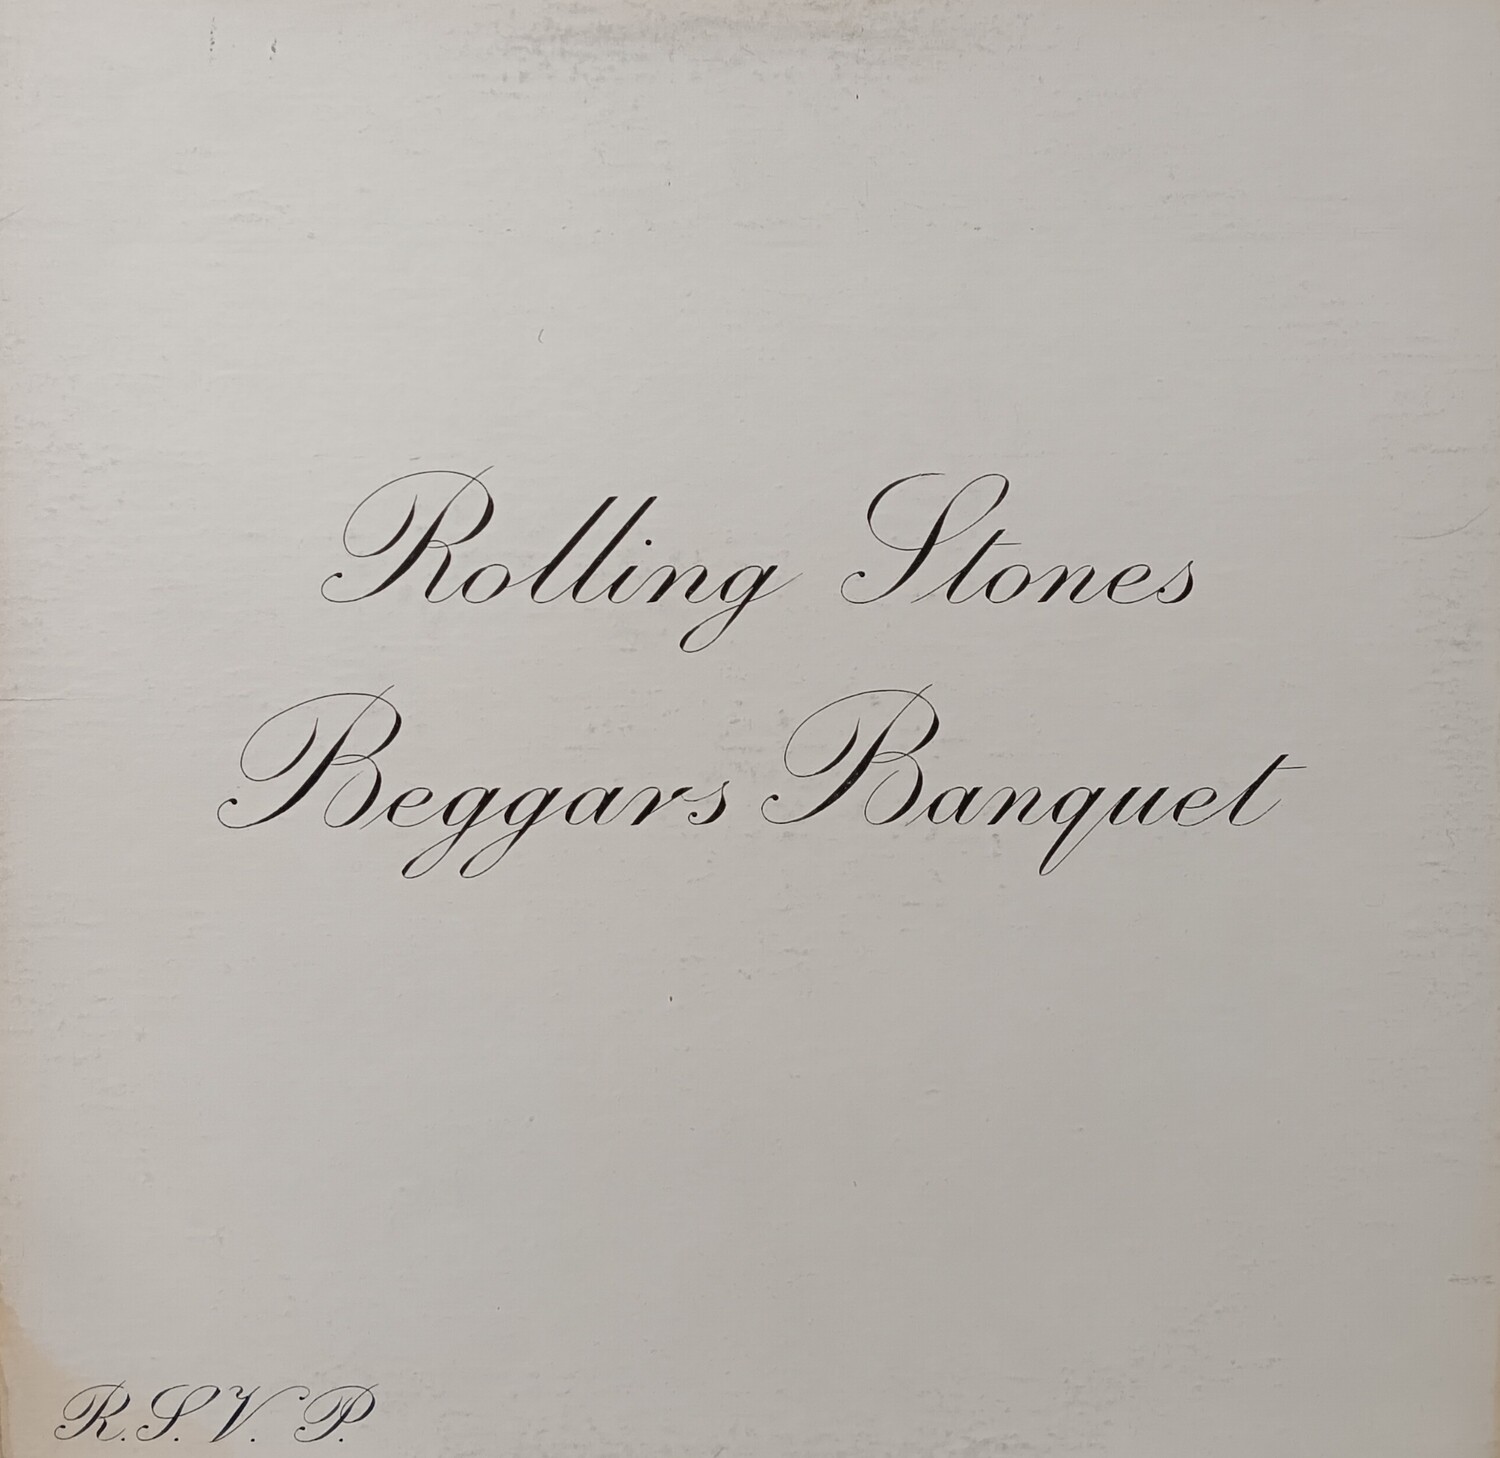 THE ROLLING STONES - Beggars Banquet